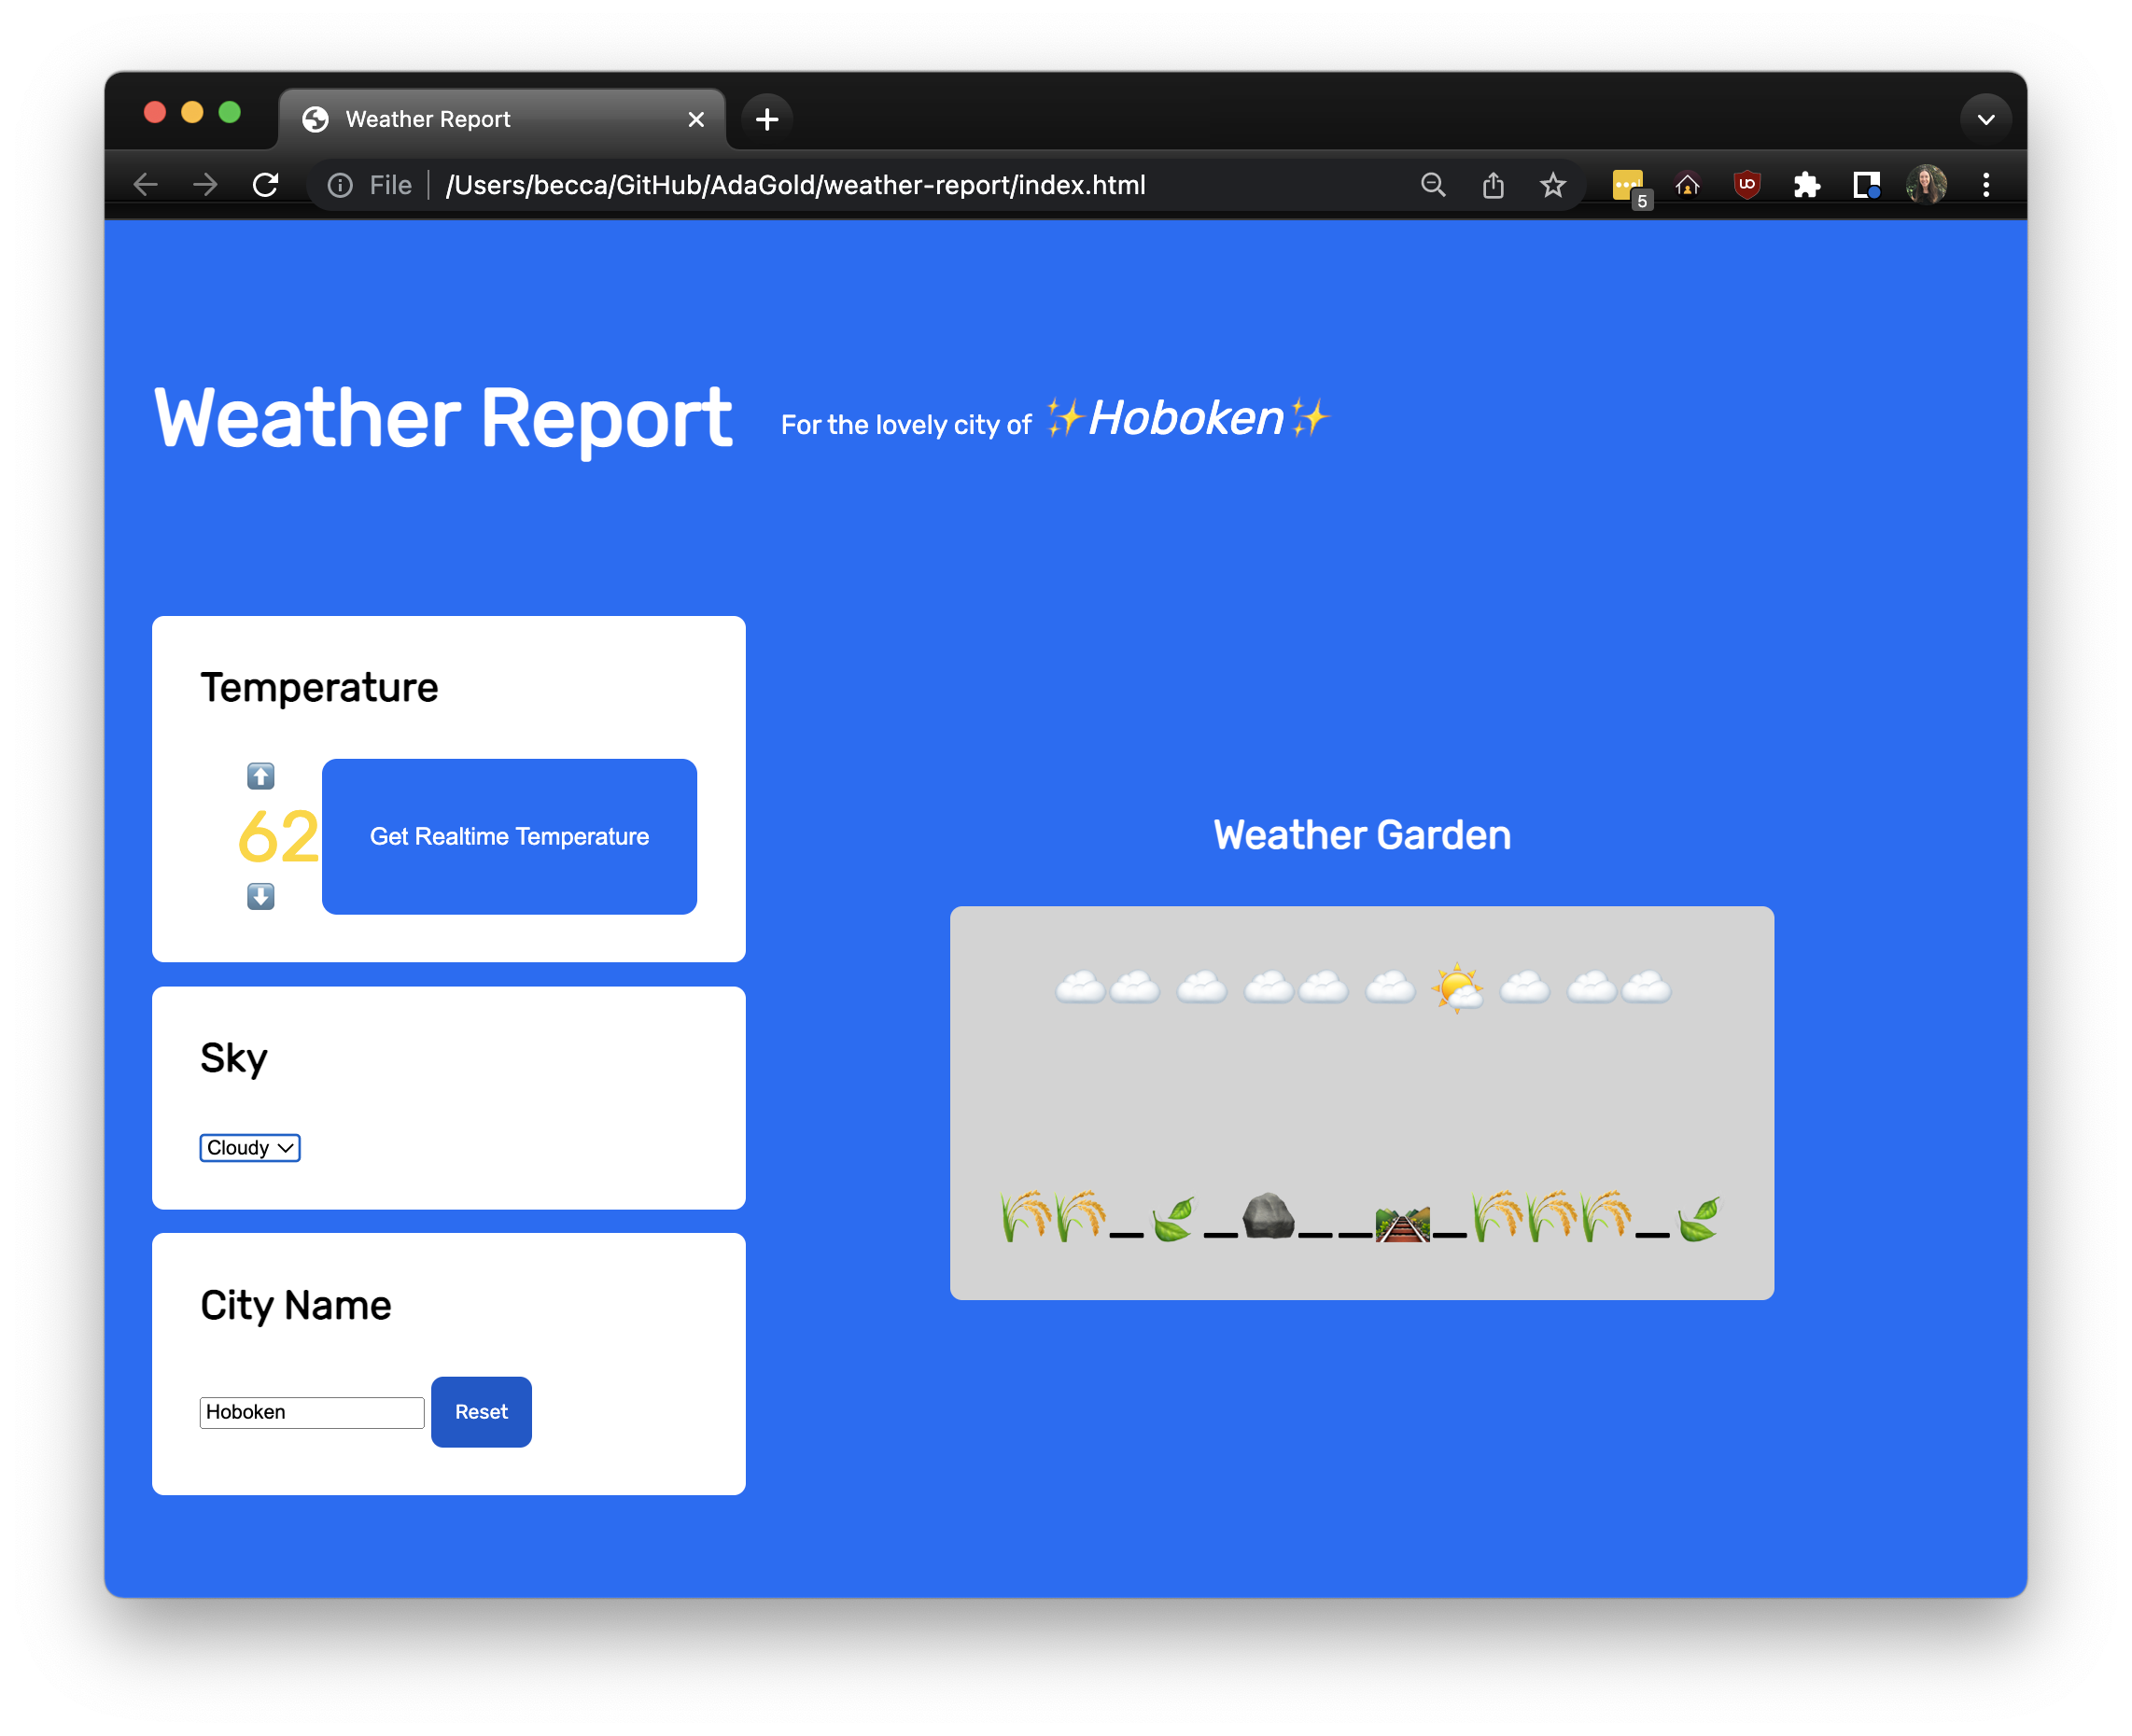 Example weather app: The temperature reads 62, in yellow text. The selected dropdown for "Sky" is "Cloudy." There is a depiction of cloudy weather. The city name is "Hoboken." The header reads "Hoboken."